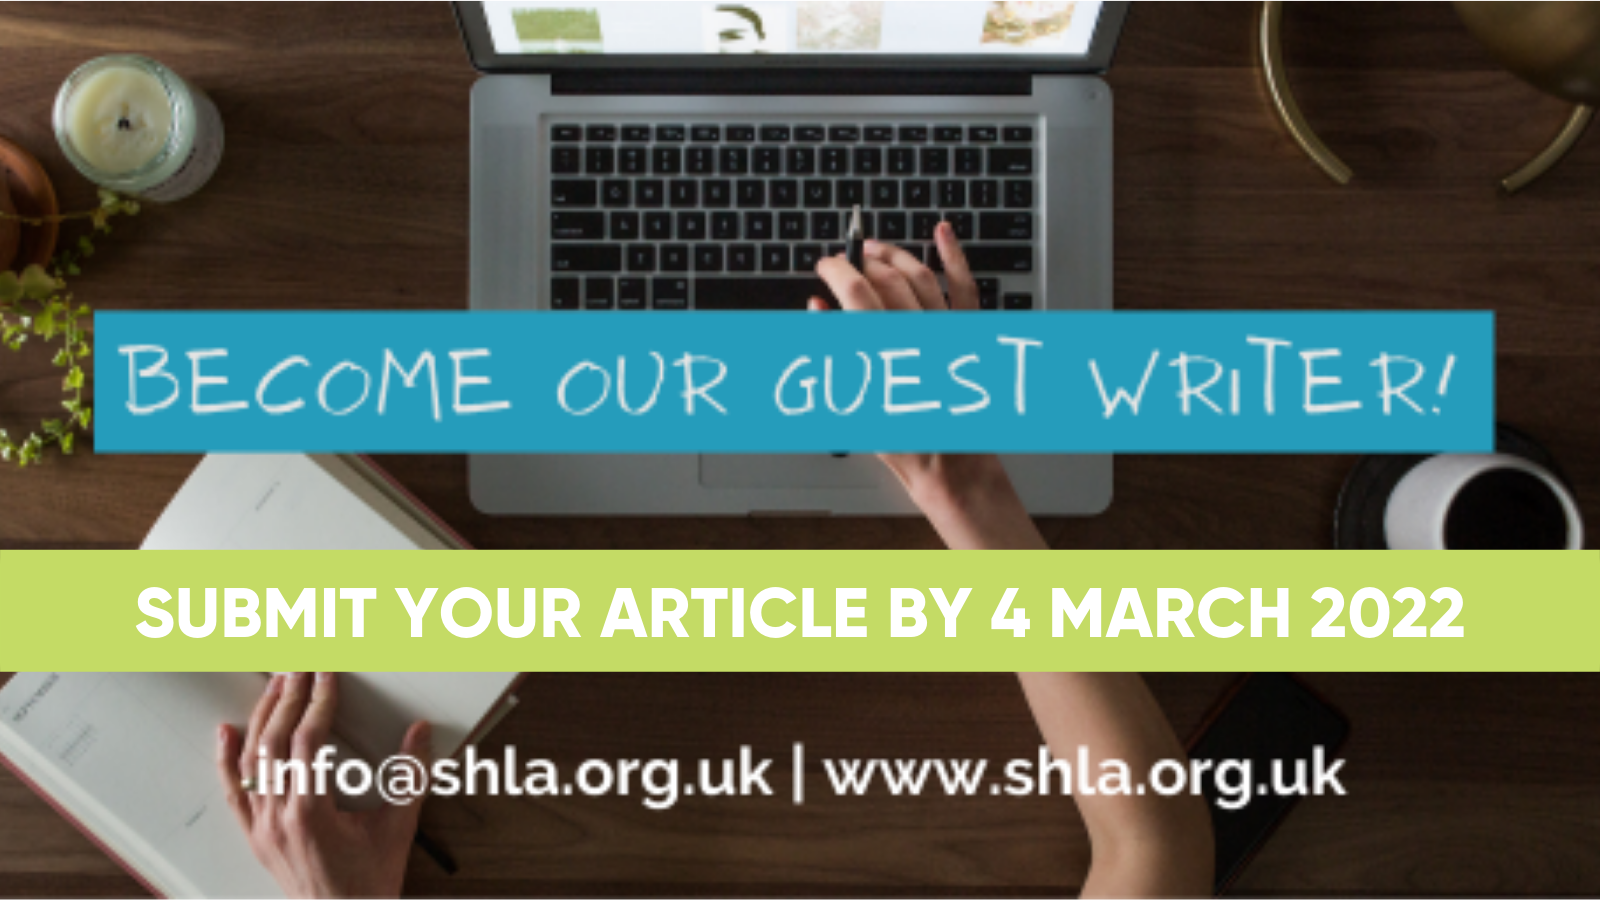 WILL YOU BE A GUEST WRITER FOR THE SHLA NEWSLETTER JUNE EDITION?